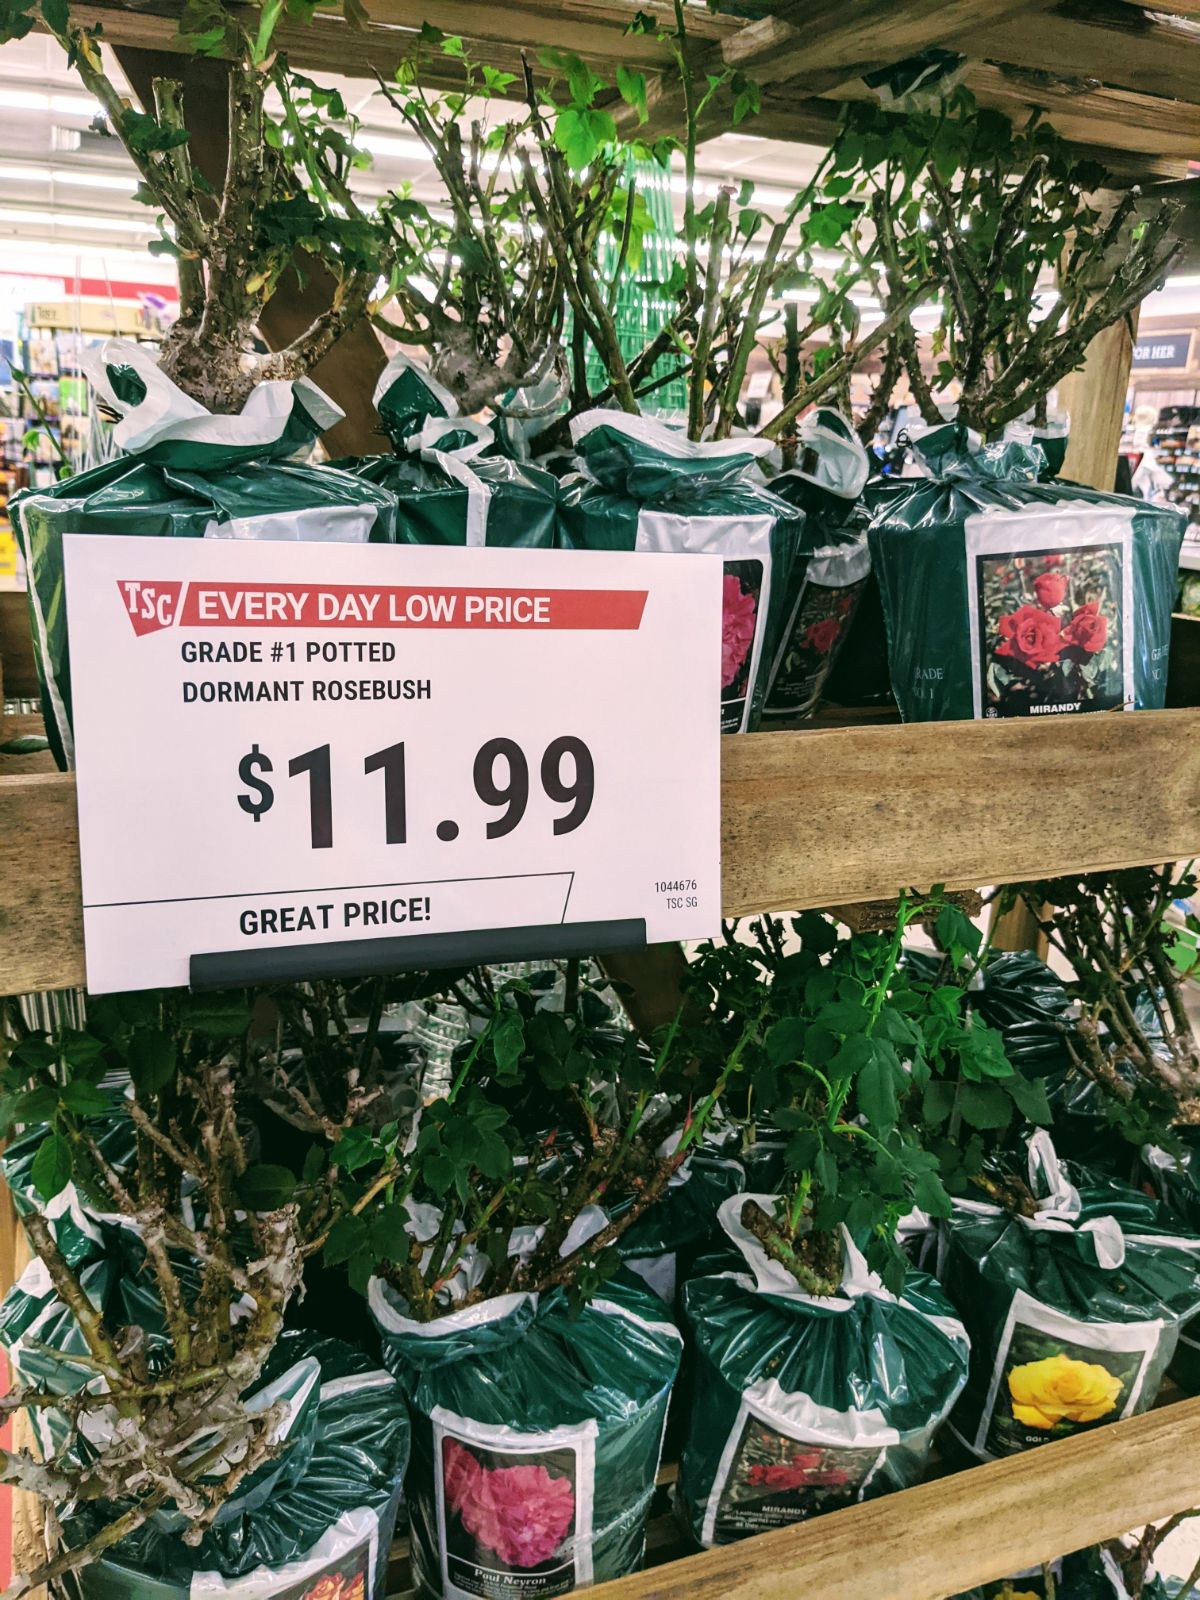 Dormant rose bushes for sale for $11.99 each at Tractor Supply